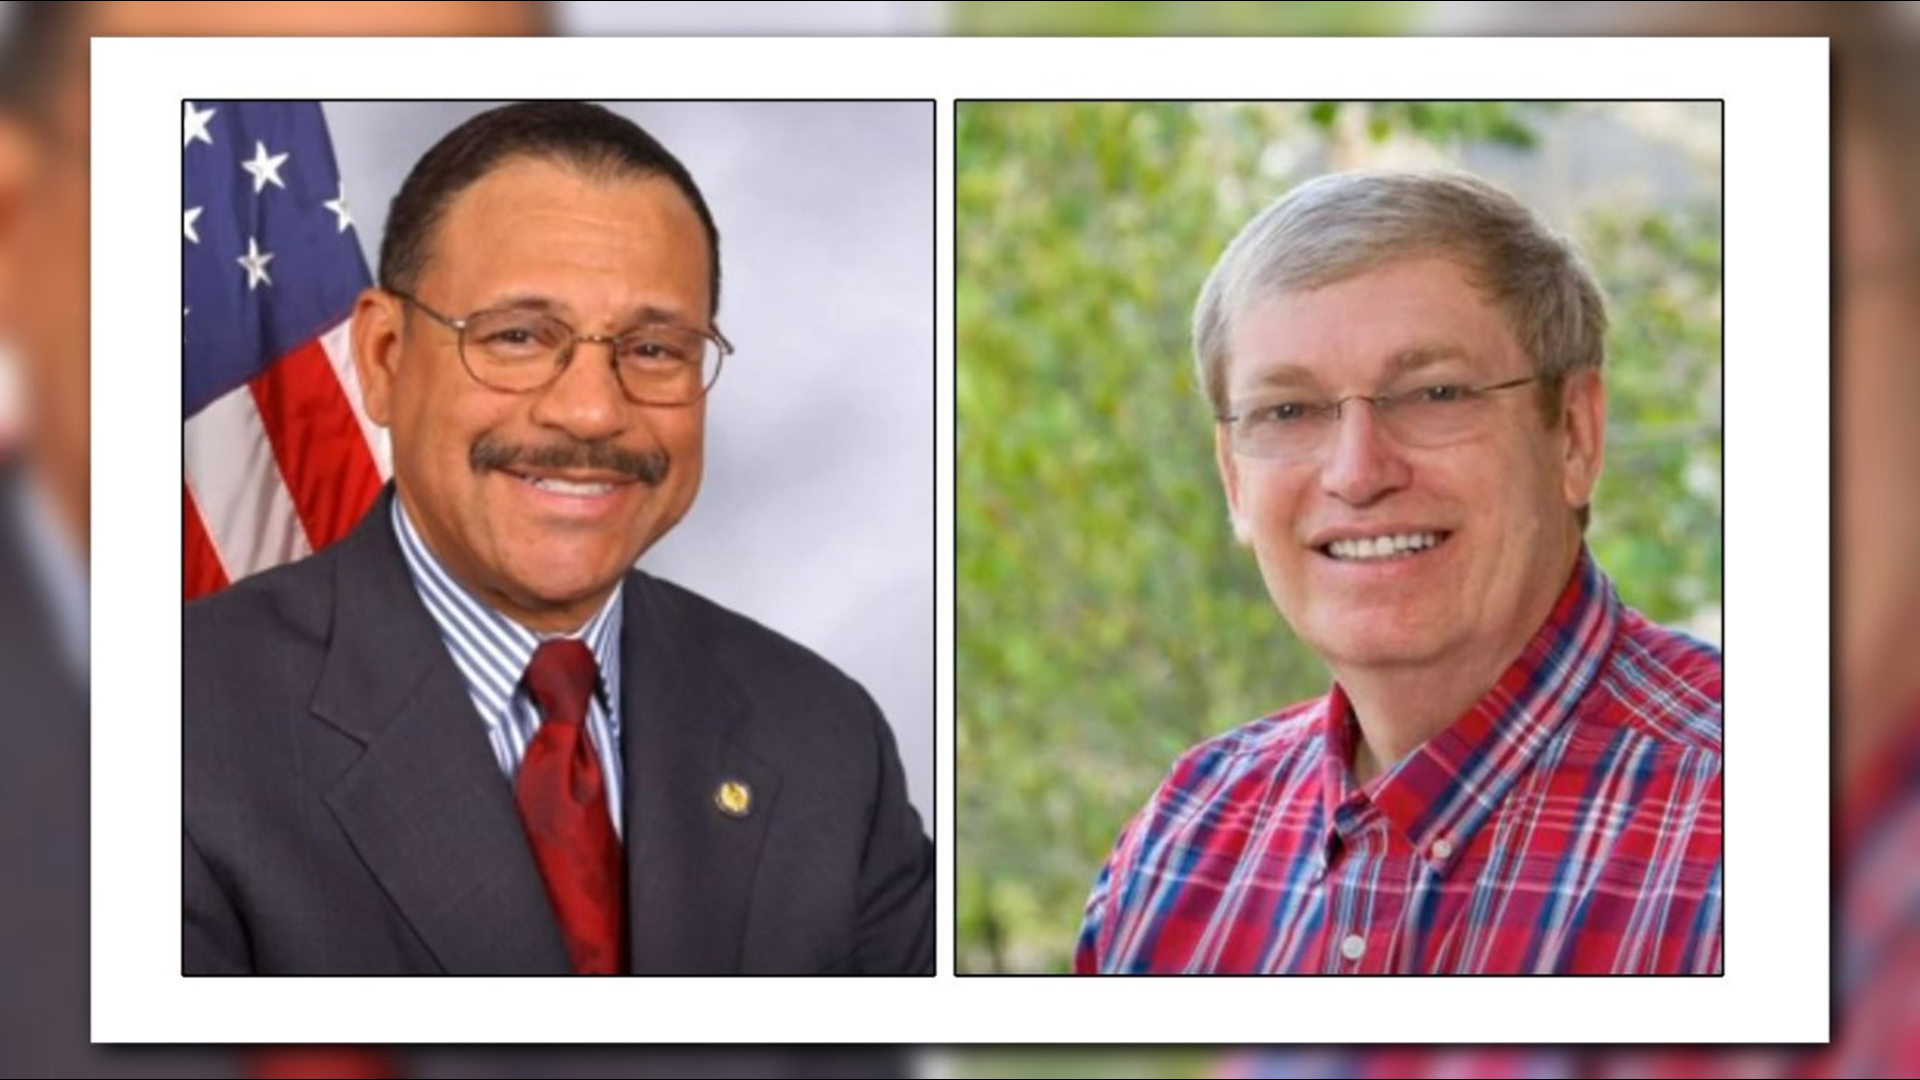 In November, Republican Don Cole, a pastor in Cordele, will face Democrat Incumbent Sanford Bishop for the District 2 congressional seat